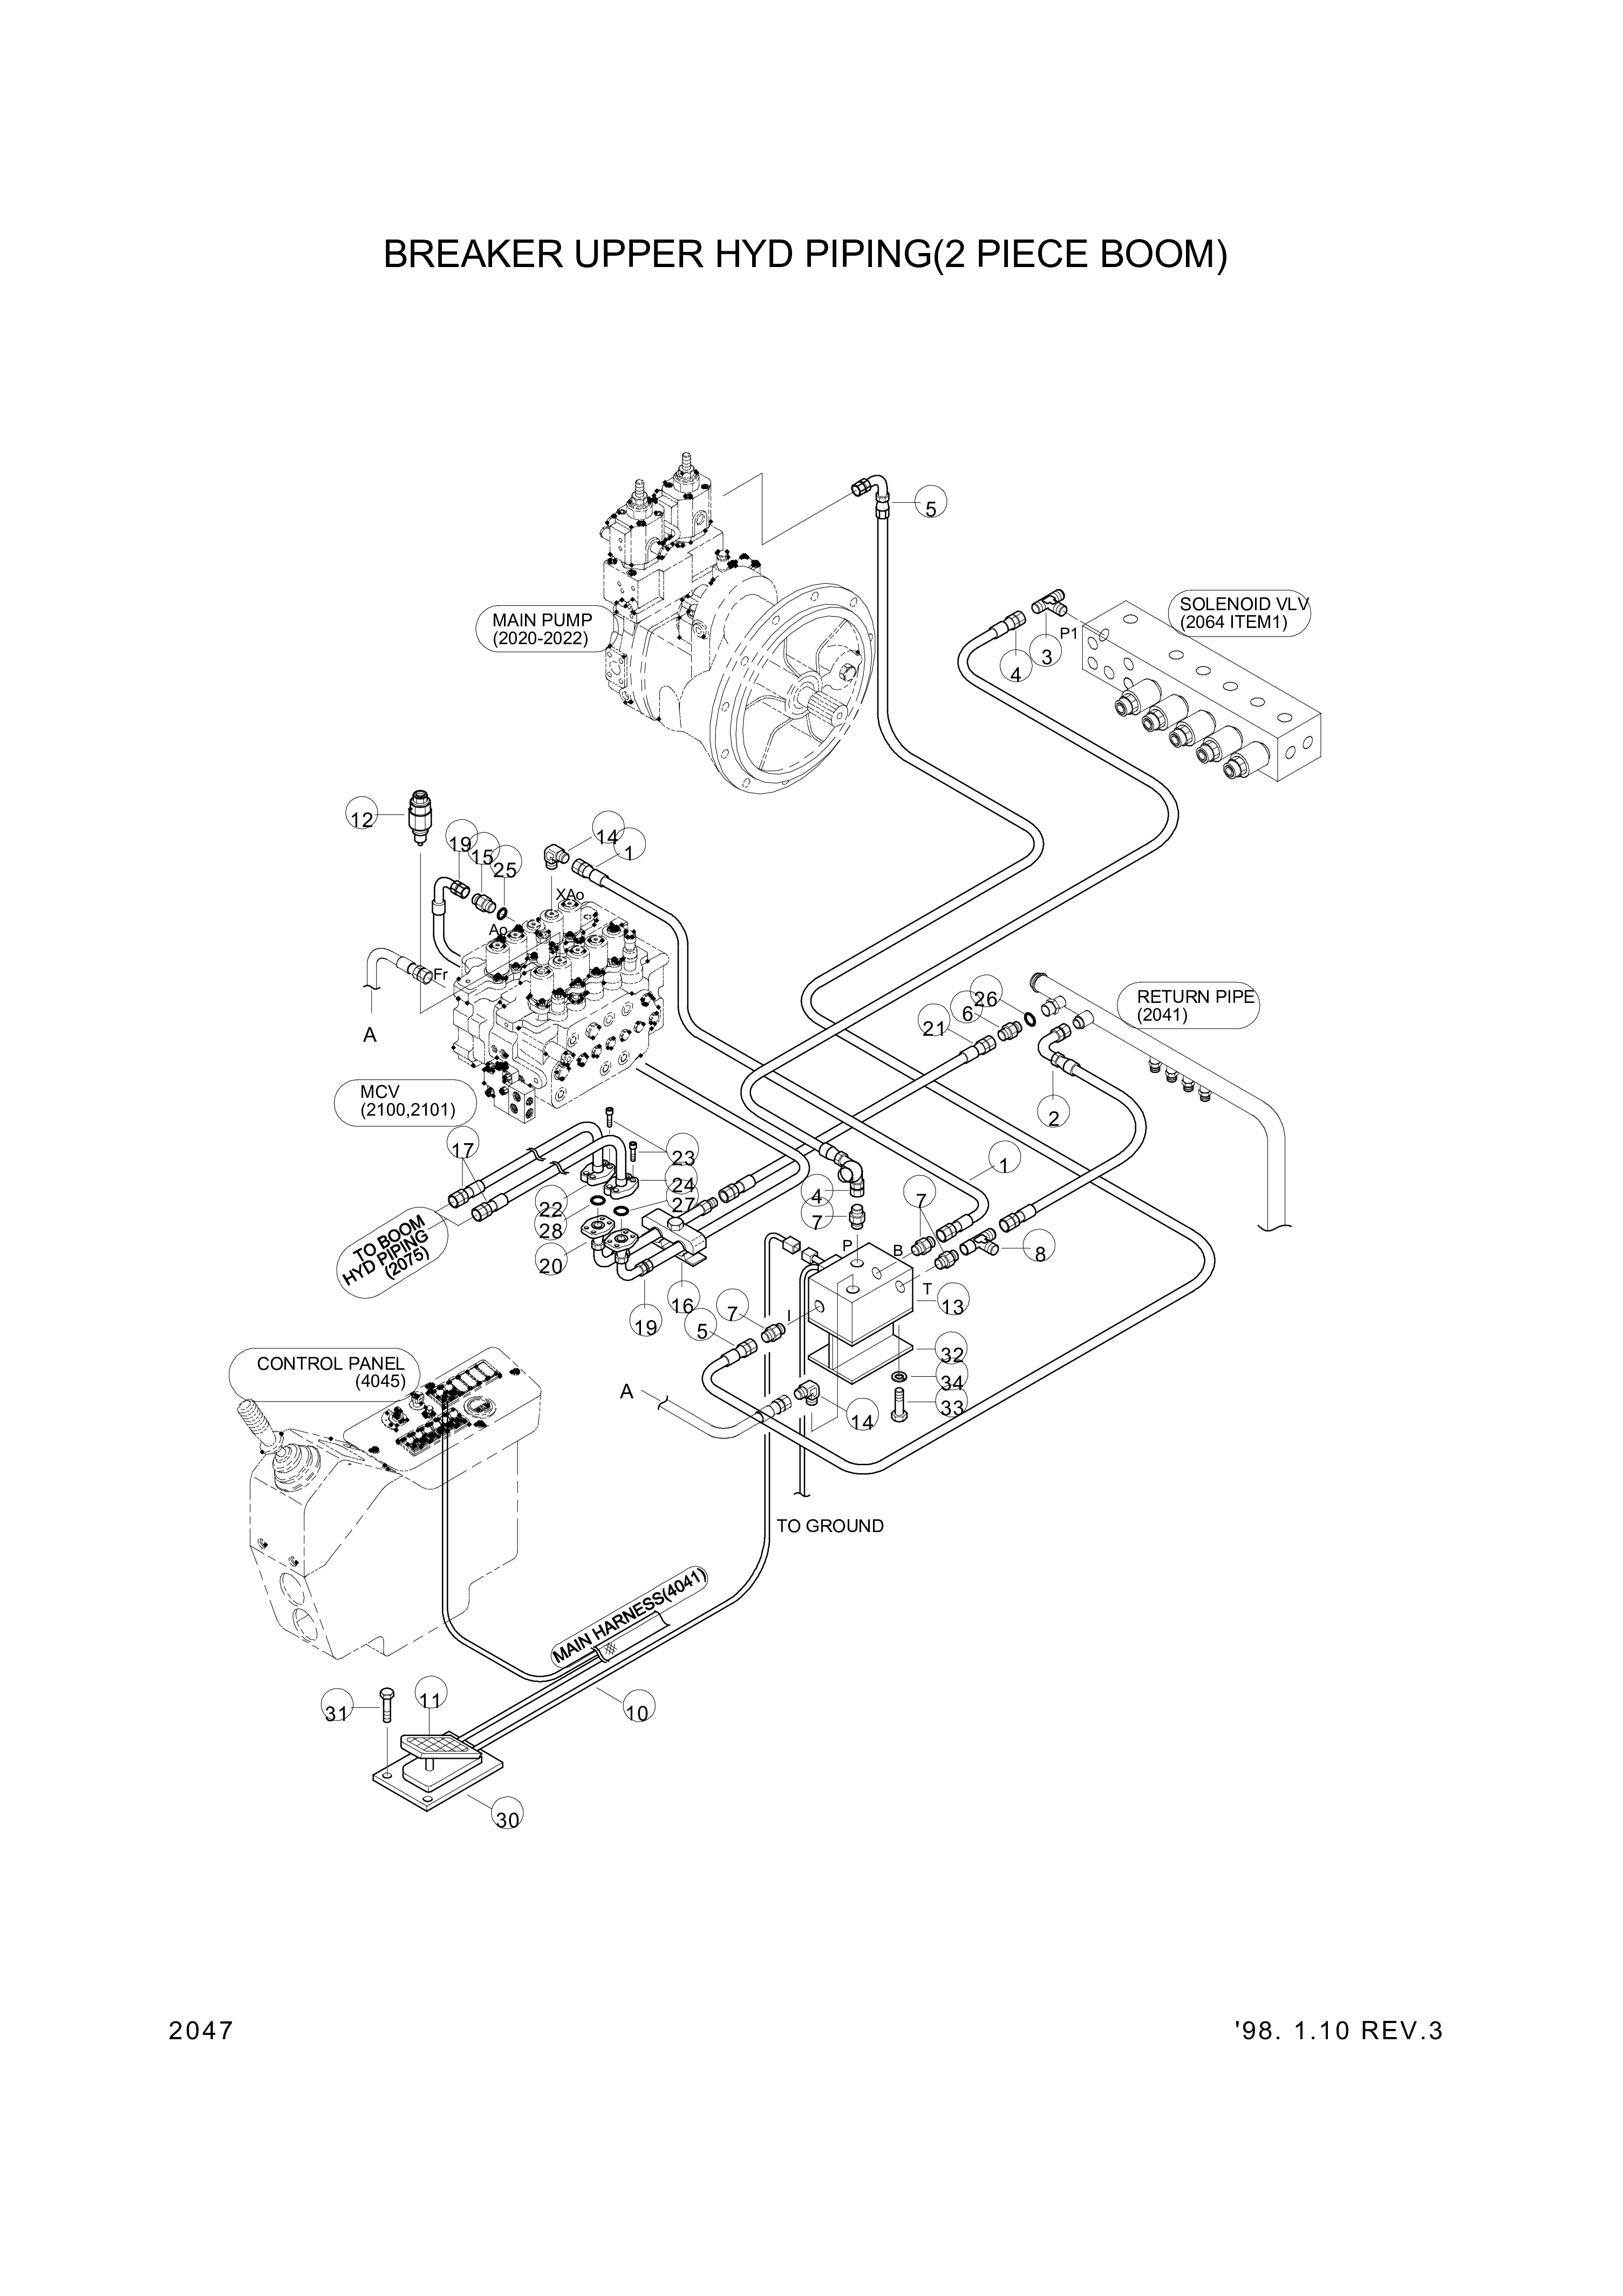 drawing for Hyundai Construction Equipment 3537-171-350-30 - VALVE ASSY-RELIEF (figure 1)